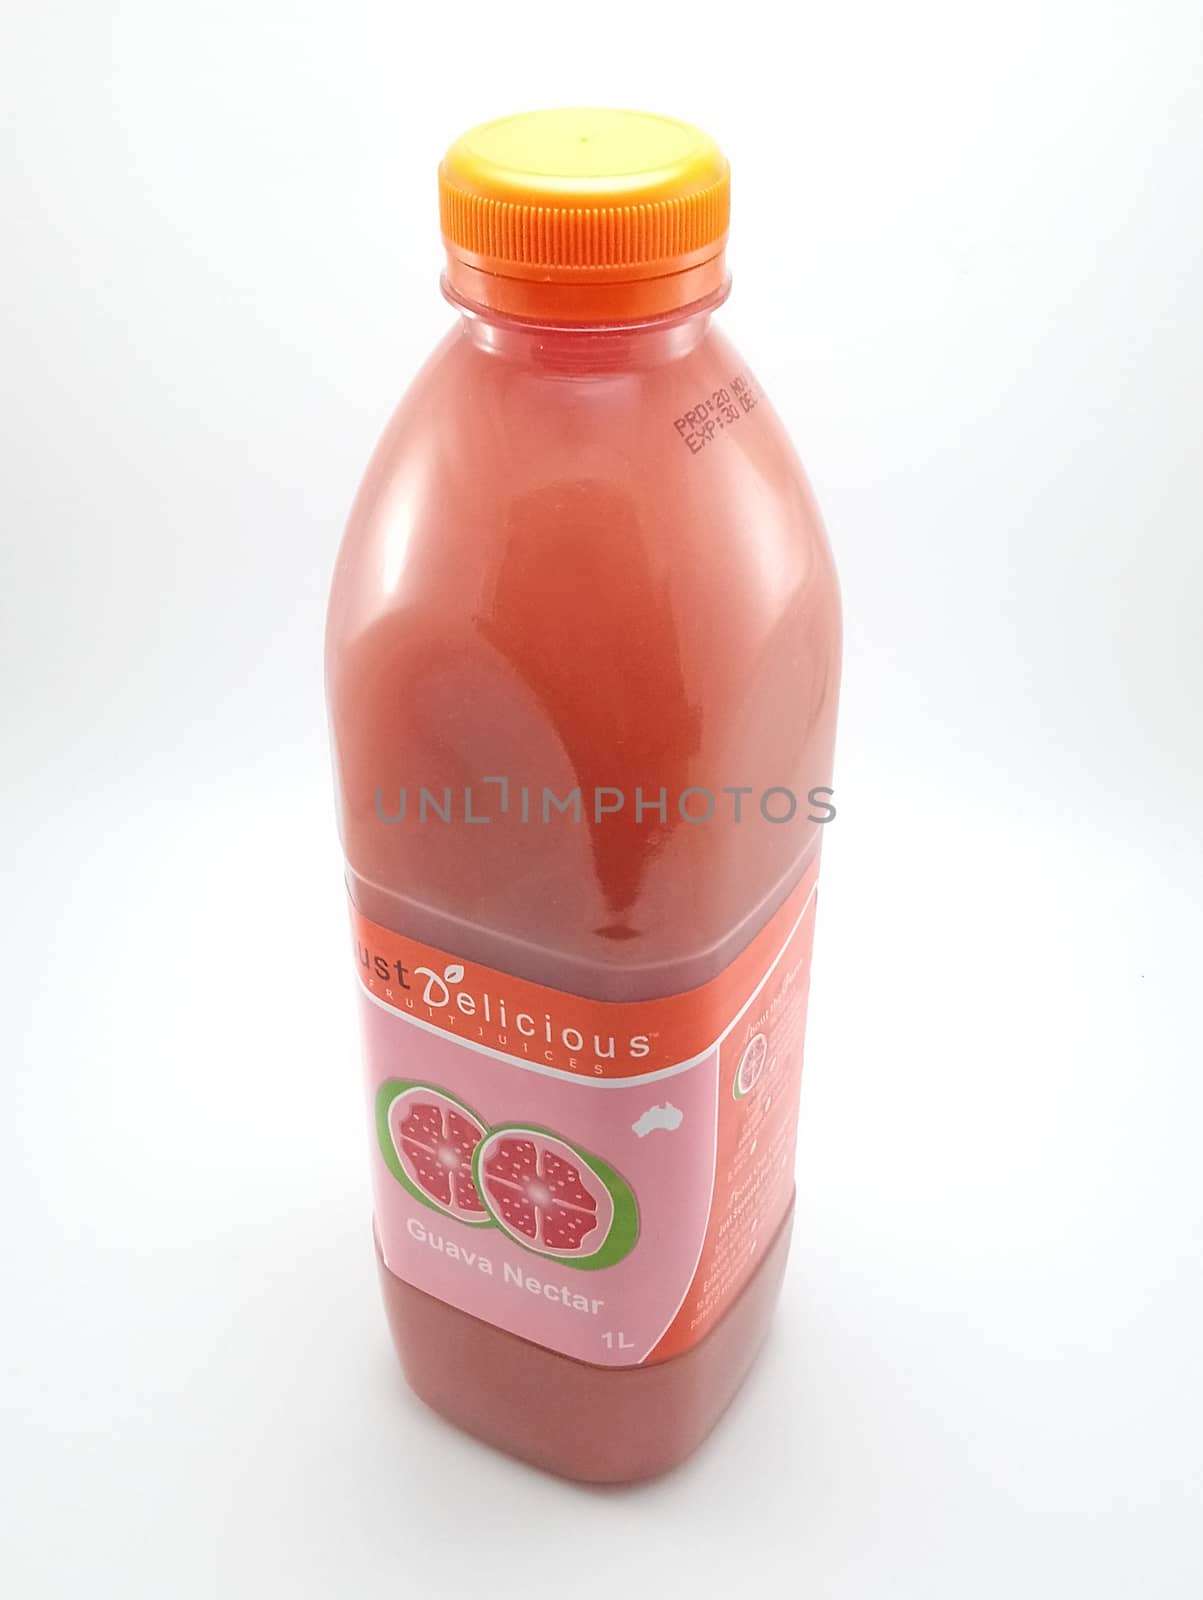 Just delicious guava nectar juice in Manila, Philippines by imwaltersy